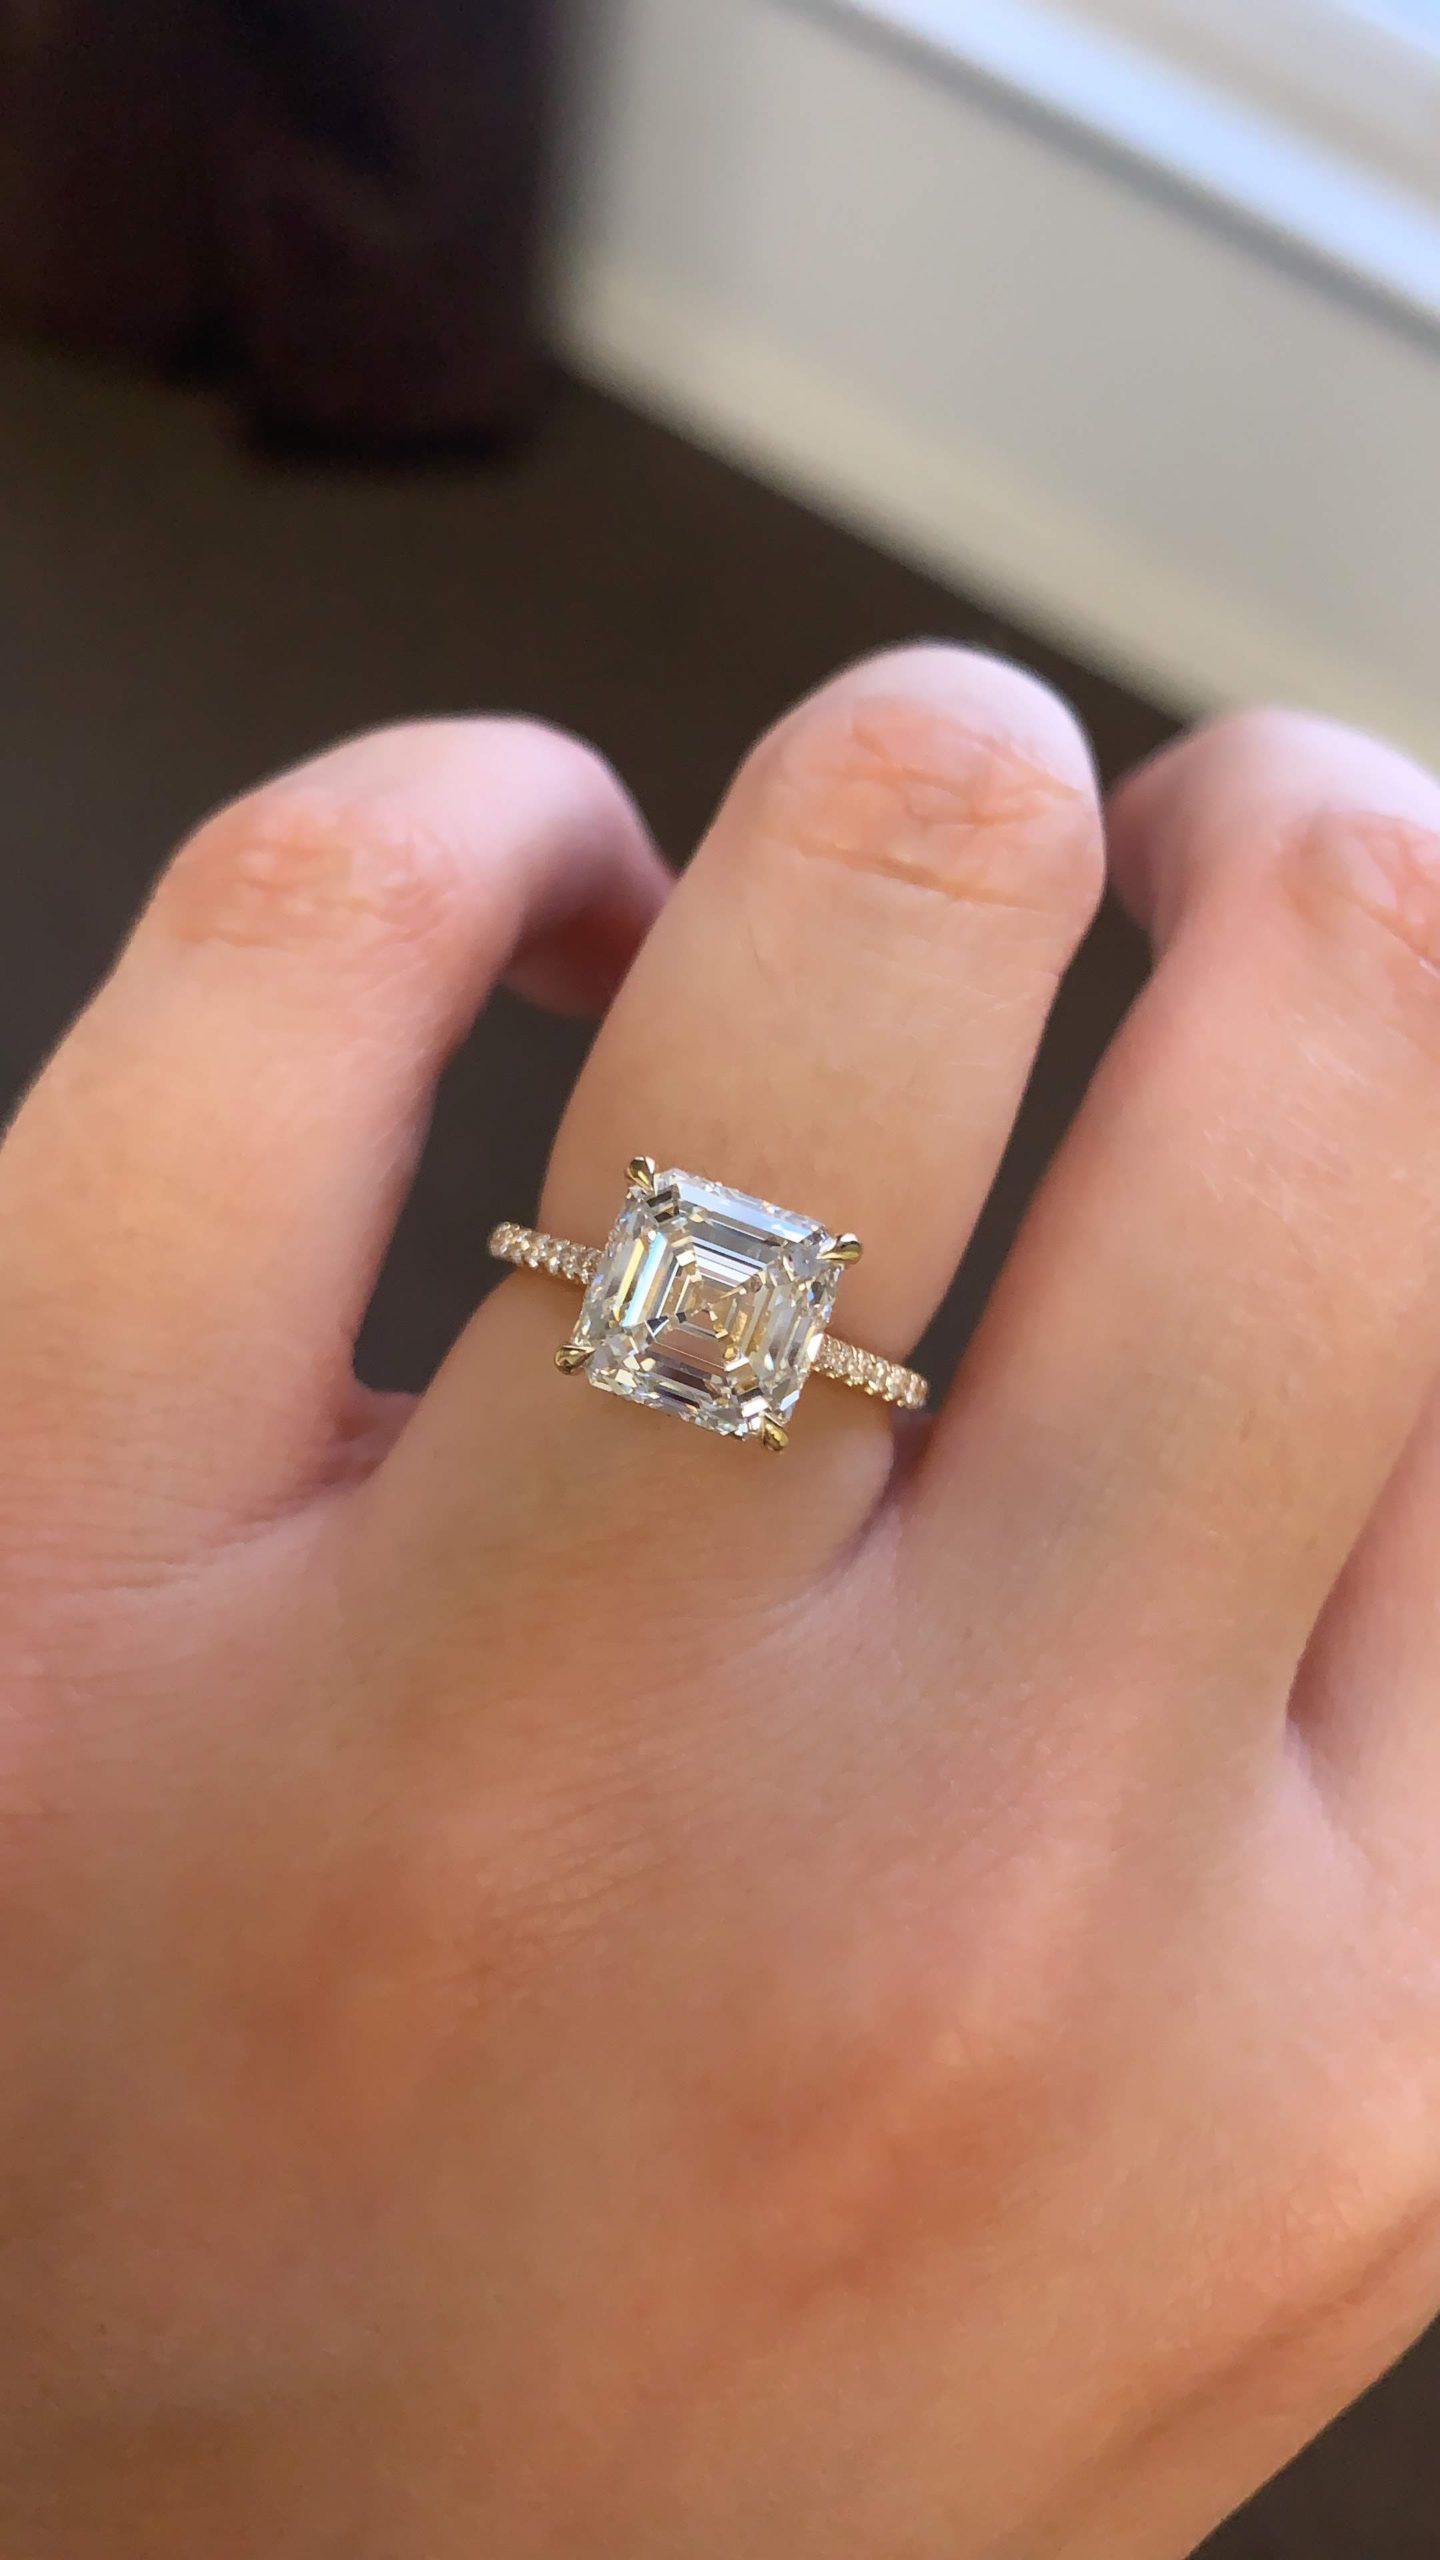 Maestro stuiten op eiwit All About the Asscher Cut Diamond: The Cost, History, and More